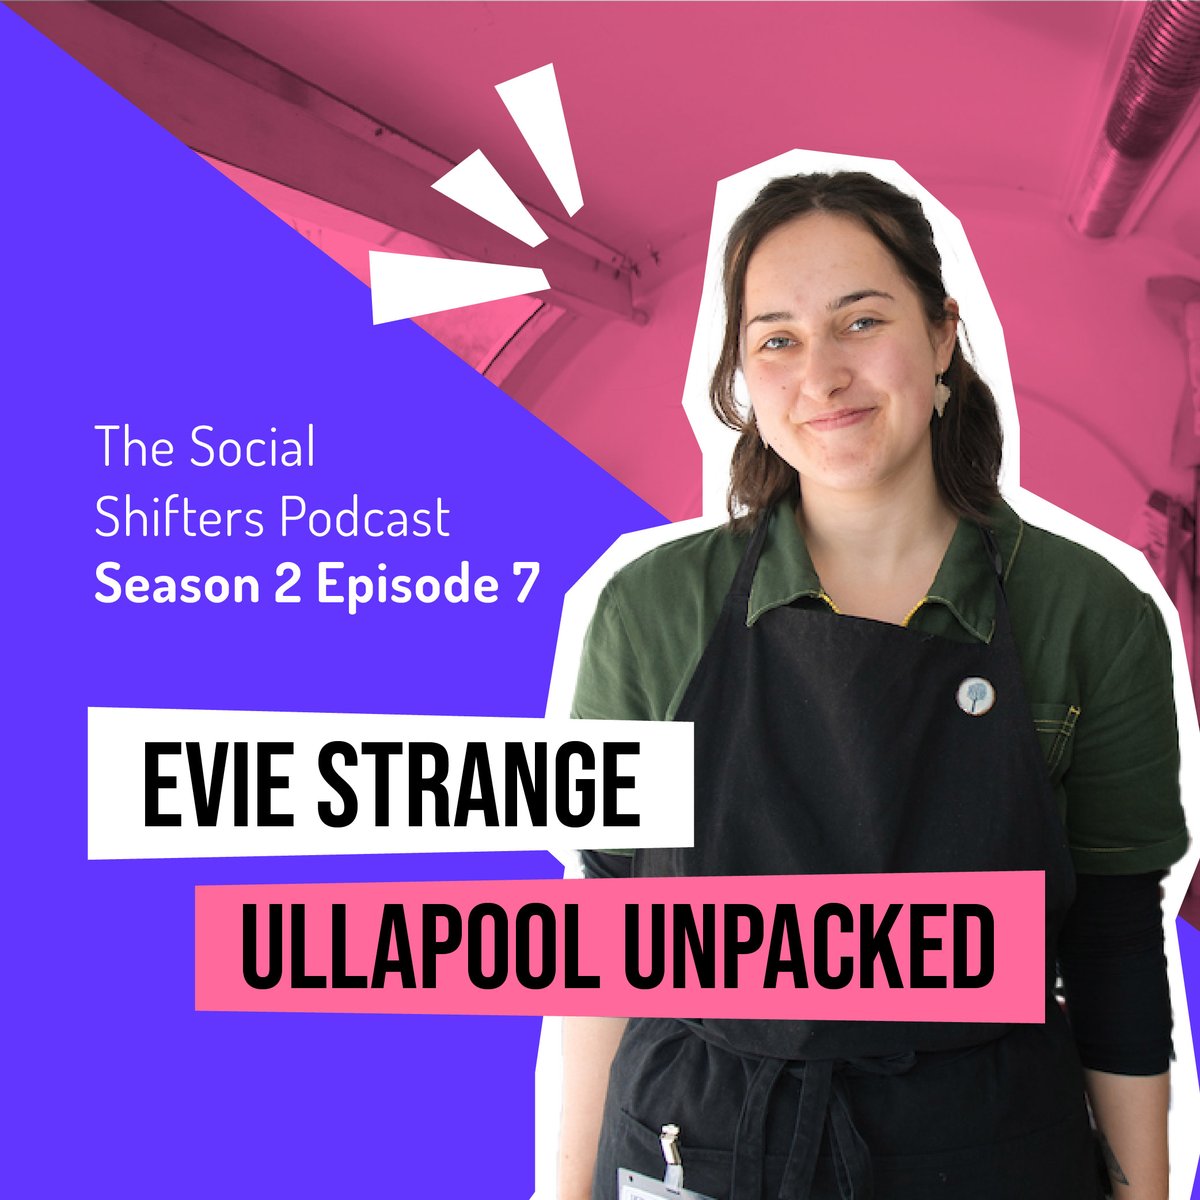 Evie's incredible story of transforming Ullapool into Scotland's zero-waste haven is one you WON'T WANT TO MISS! #UllapoolUnpacked ♻️ From battling mountains of waste ️ to refill shop champion ♻️, Evie's making sustainable living accessible to all! 👇👇 youtu.be/_tXTAKra914